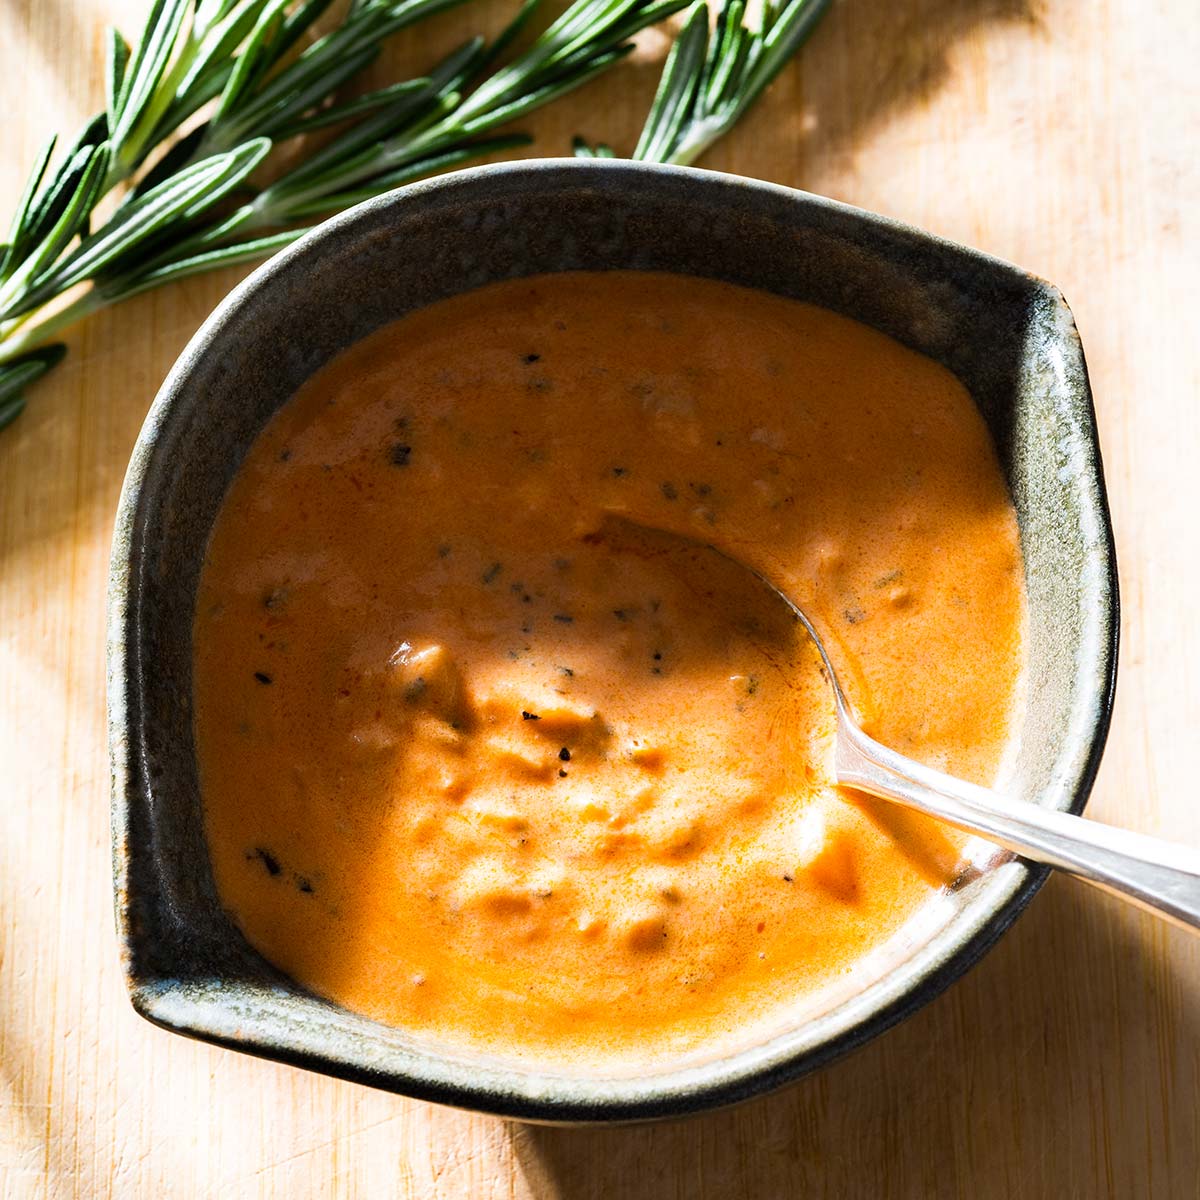 Rosemary cream sauce in a bowl with a spoon.